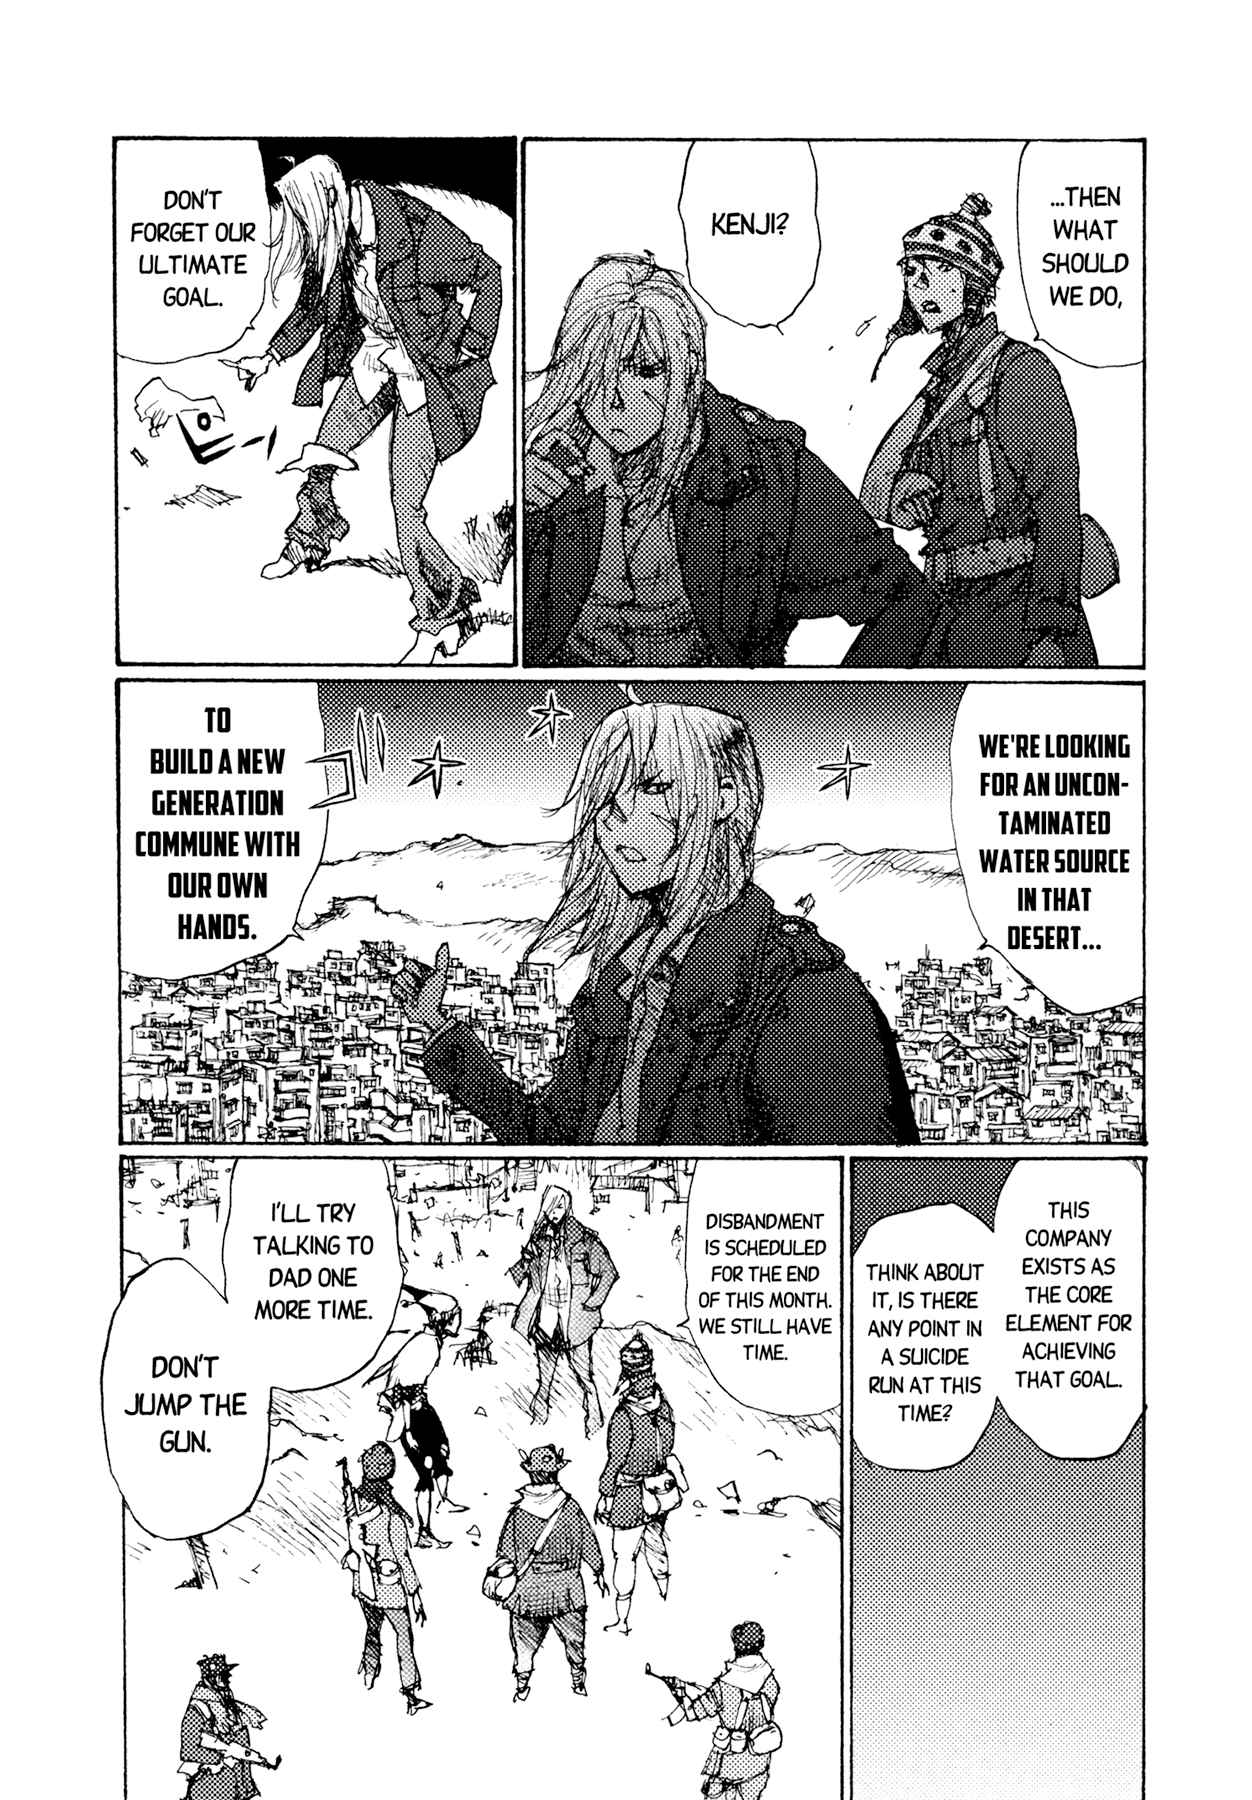 Alice from Hell Vol. 3 Ch. 16 I Demand Compensation